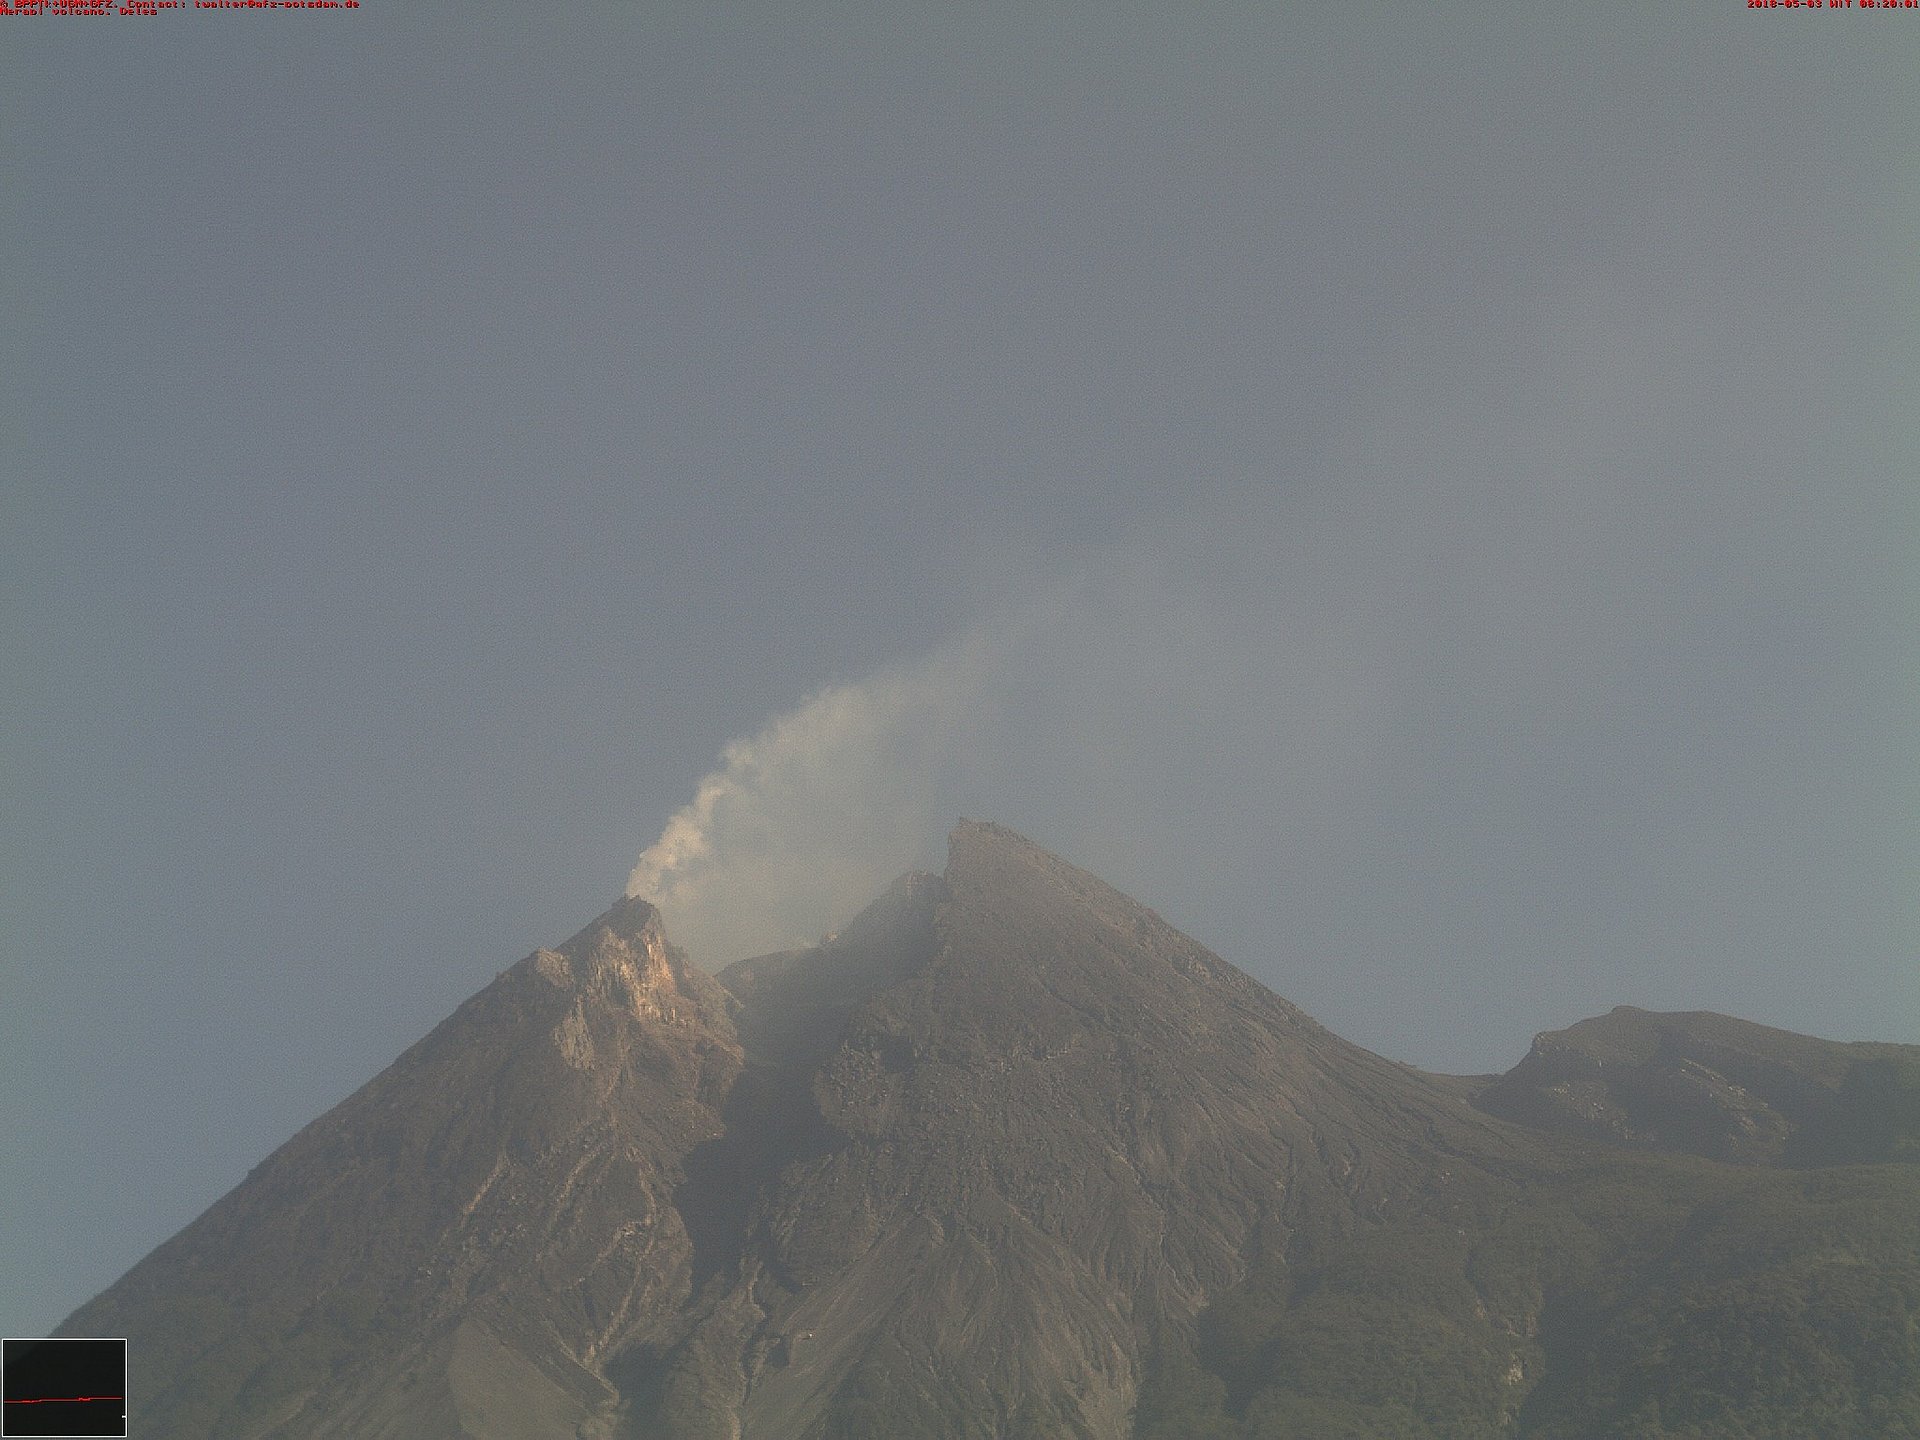 Photographs of the Merapi from before and during the eruption on 11 May 2018 speak for the three-phase model: Gas footsteps can be seen on the Feuerberg on 3 May.